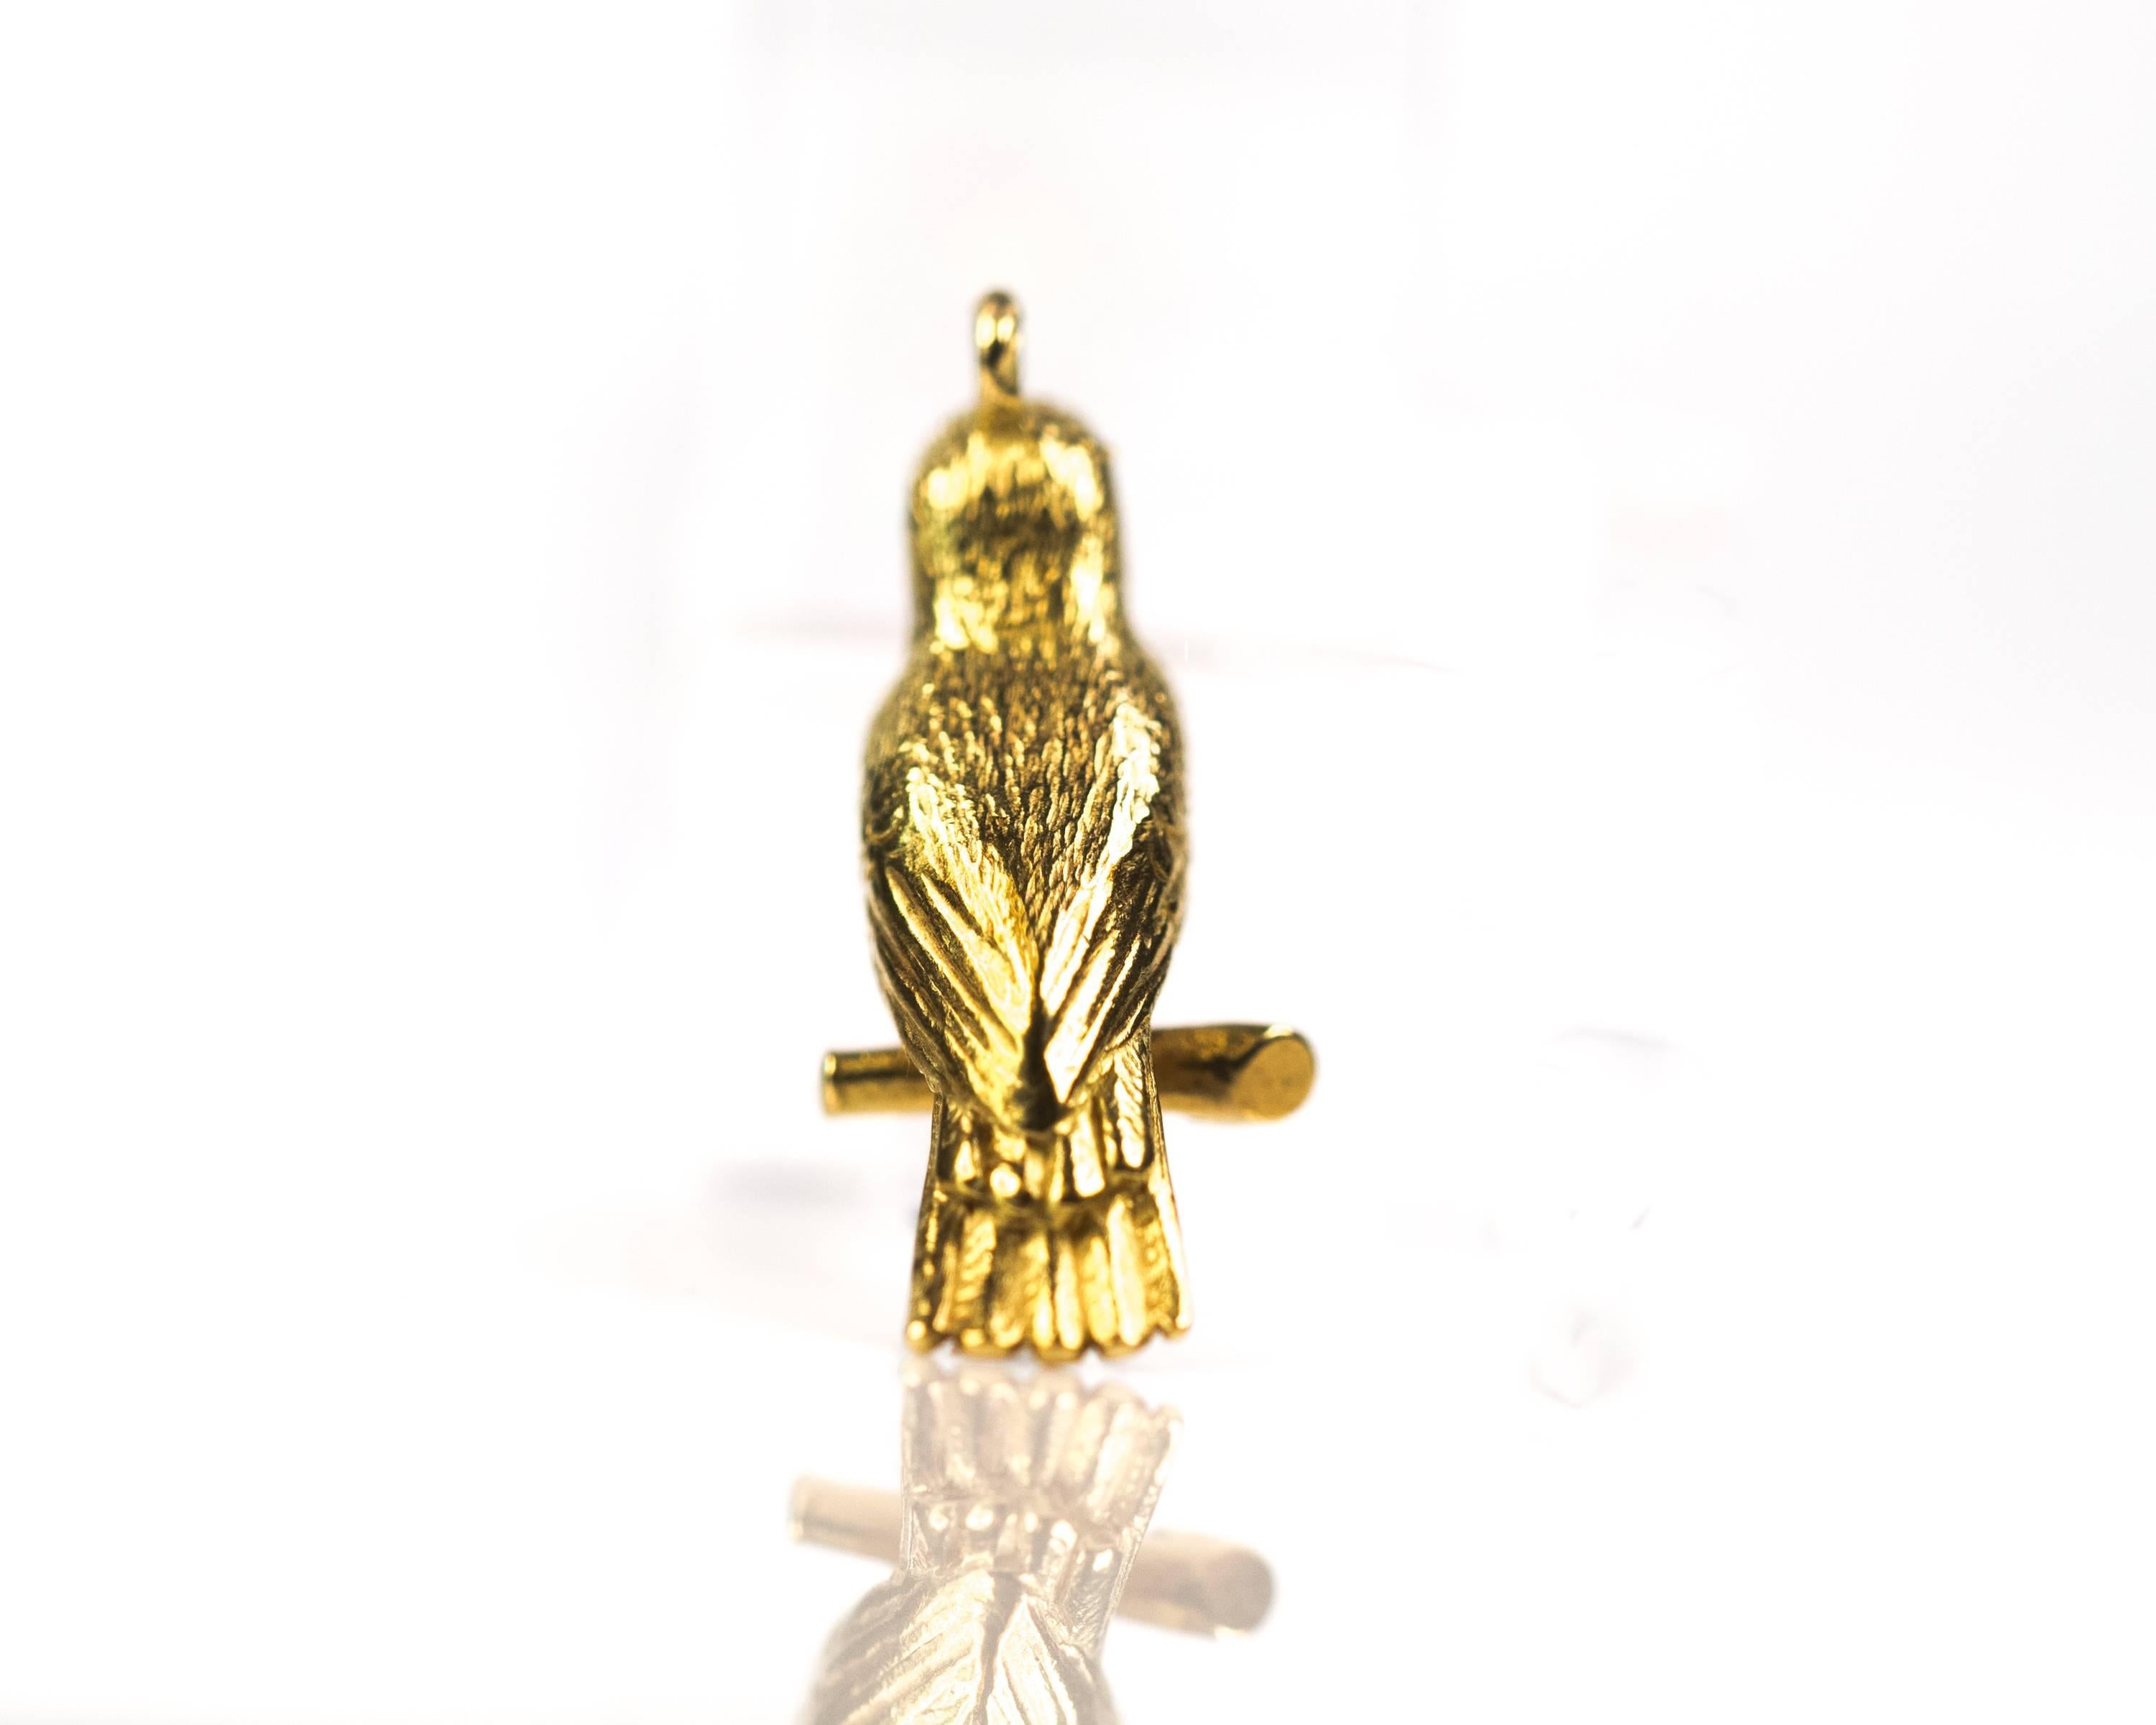 1950s Woodpecker Bird Charm - 18 Karat Yellow Gold

This richly detailed 18 Karat Yellow Gold Bird sitting on a Branch seems to be smiling! This charm is full of texture and details.
The head, back and underside of the bird are textured with short,